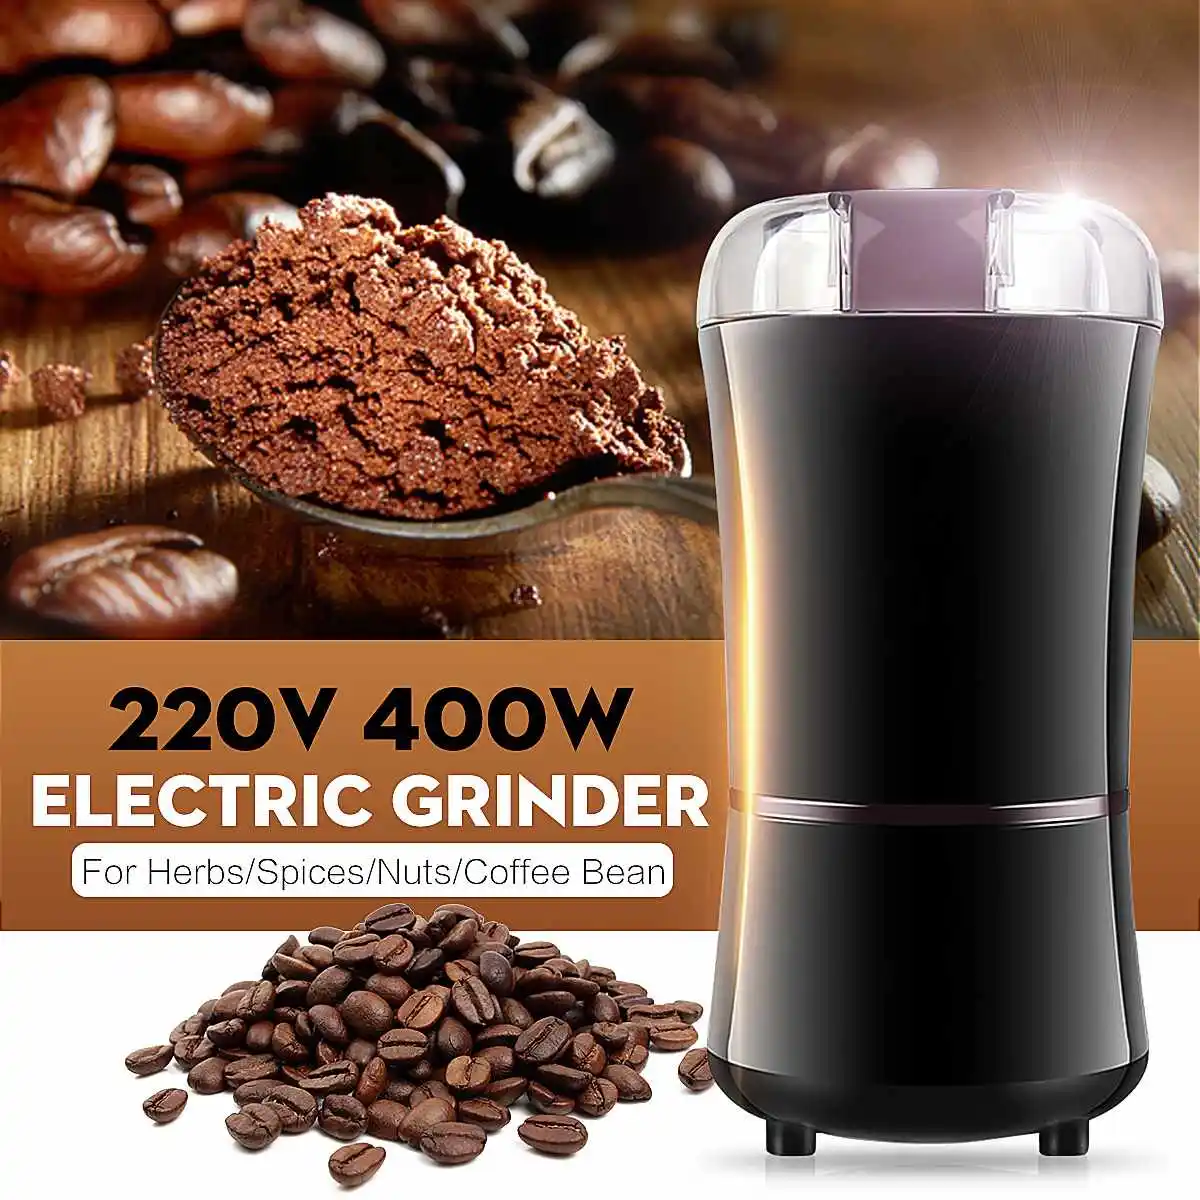 

400W Electric Coffee Grinder Salt Pepper Beans Spice Nut Seed Coffee Bean Grinder with Stainless Steel Blade Coffee Machine 220v